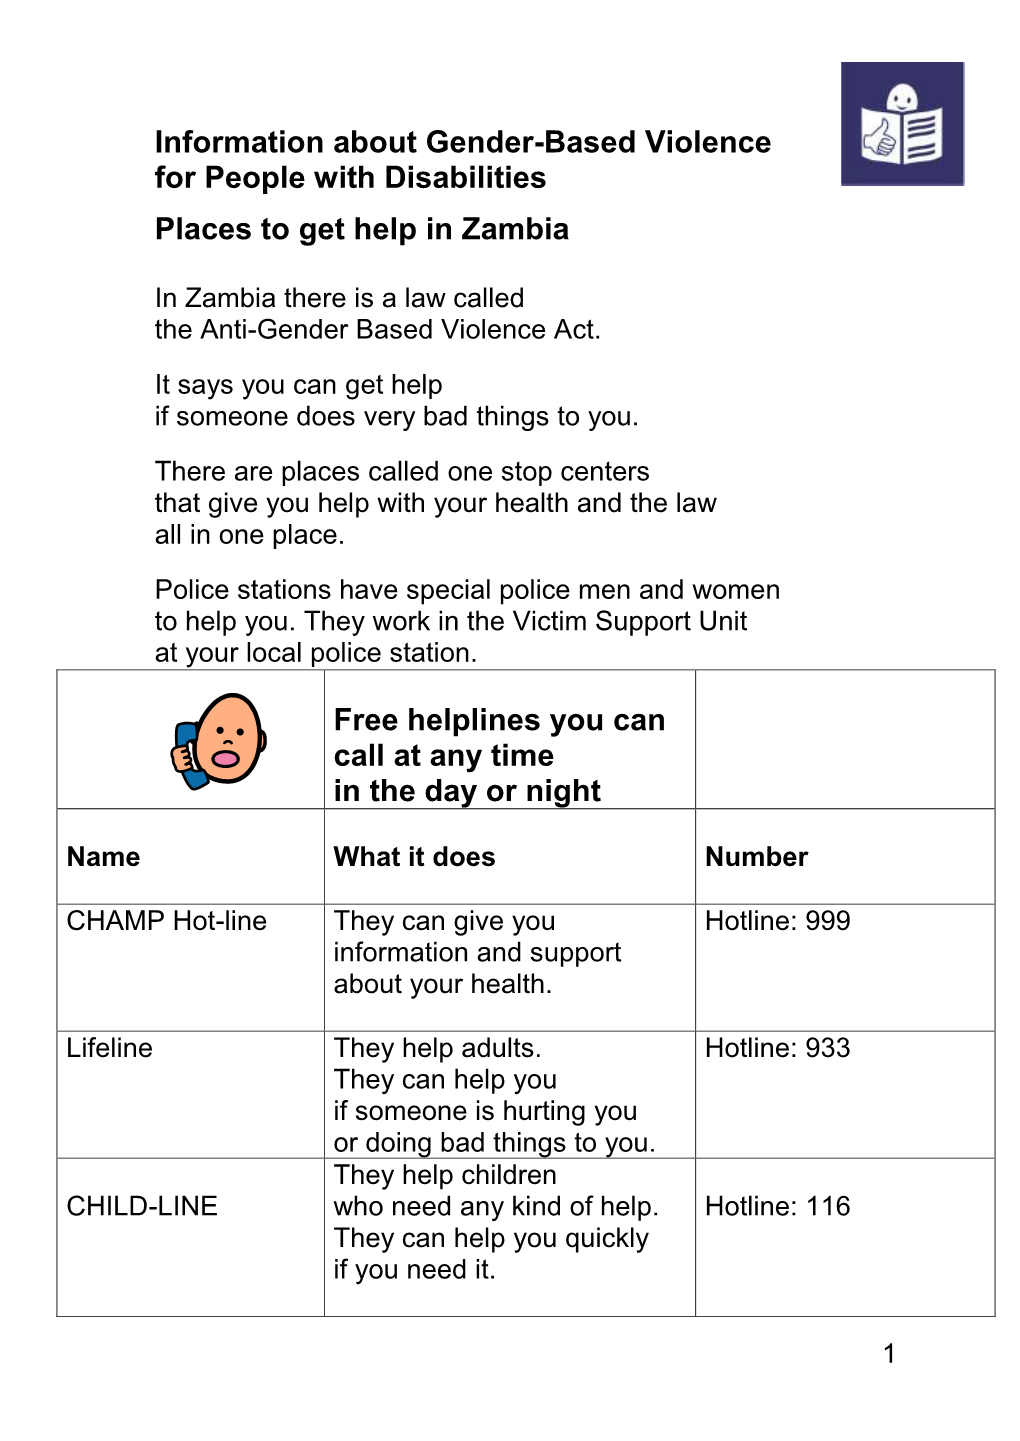 Information About Gender-Based Violence for People with Disabilities. Places to Get Help in Zambia